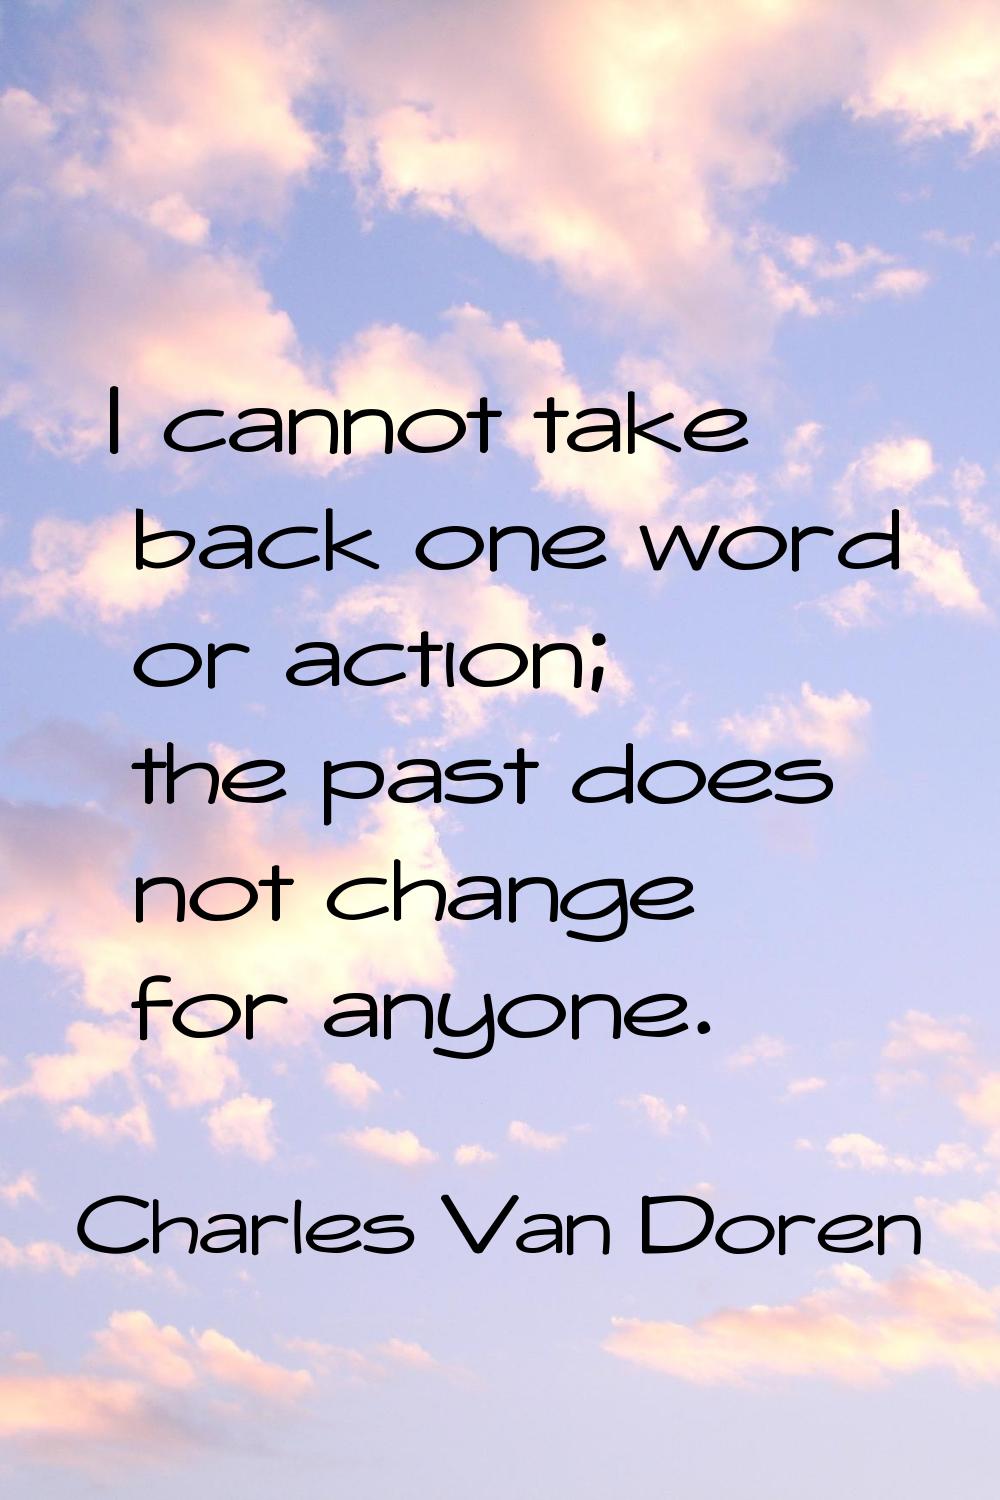 I cannot take back one word or action; the past does not change for anyone.